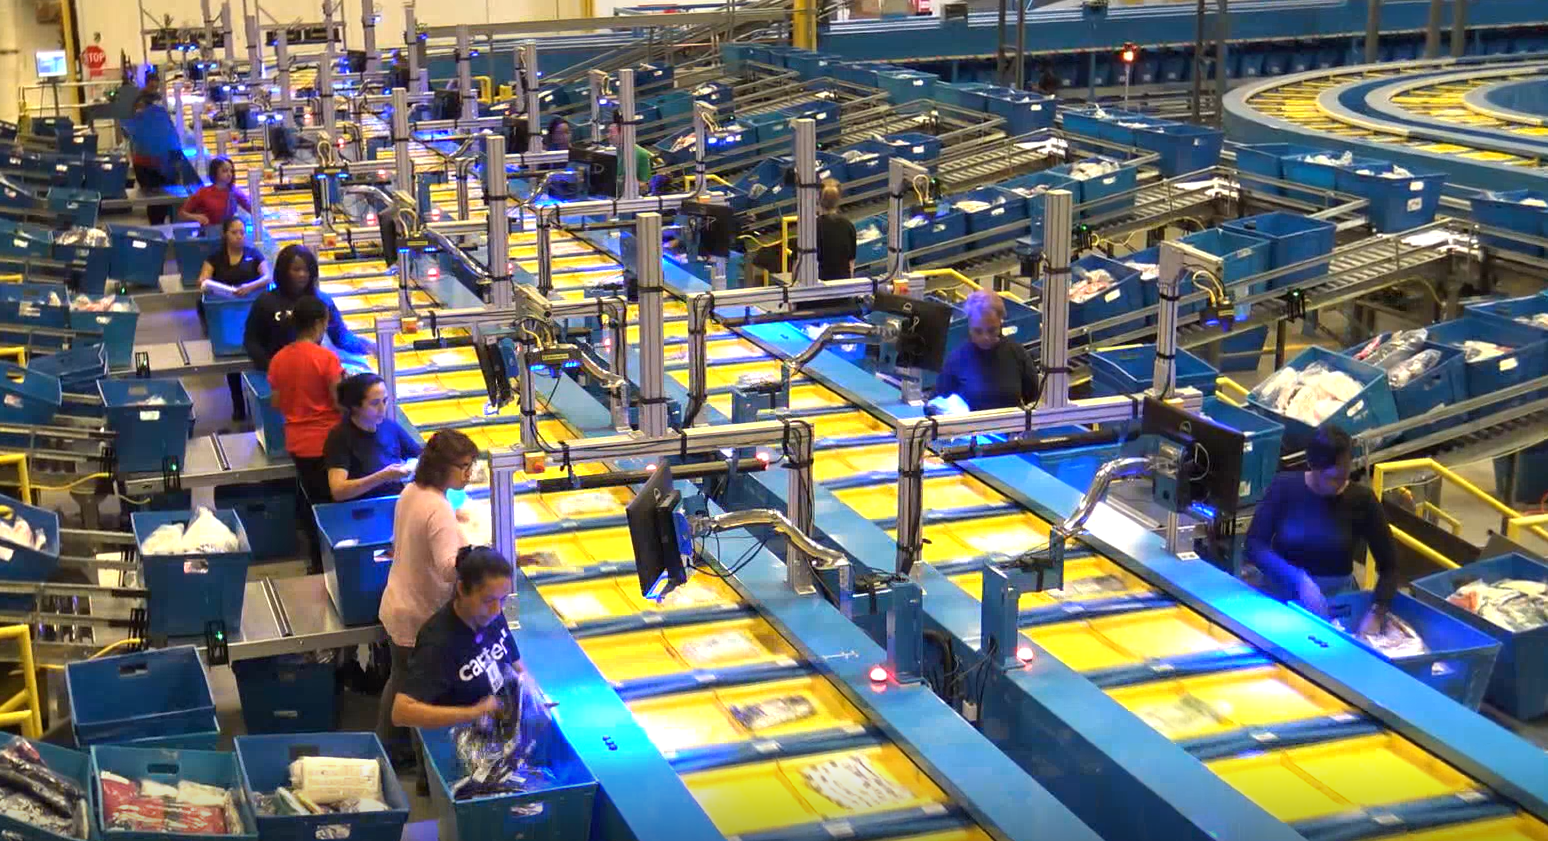 Group of warehouse employees sorting packages